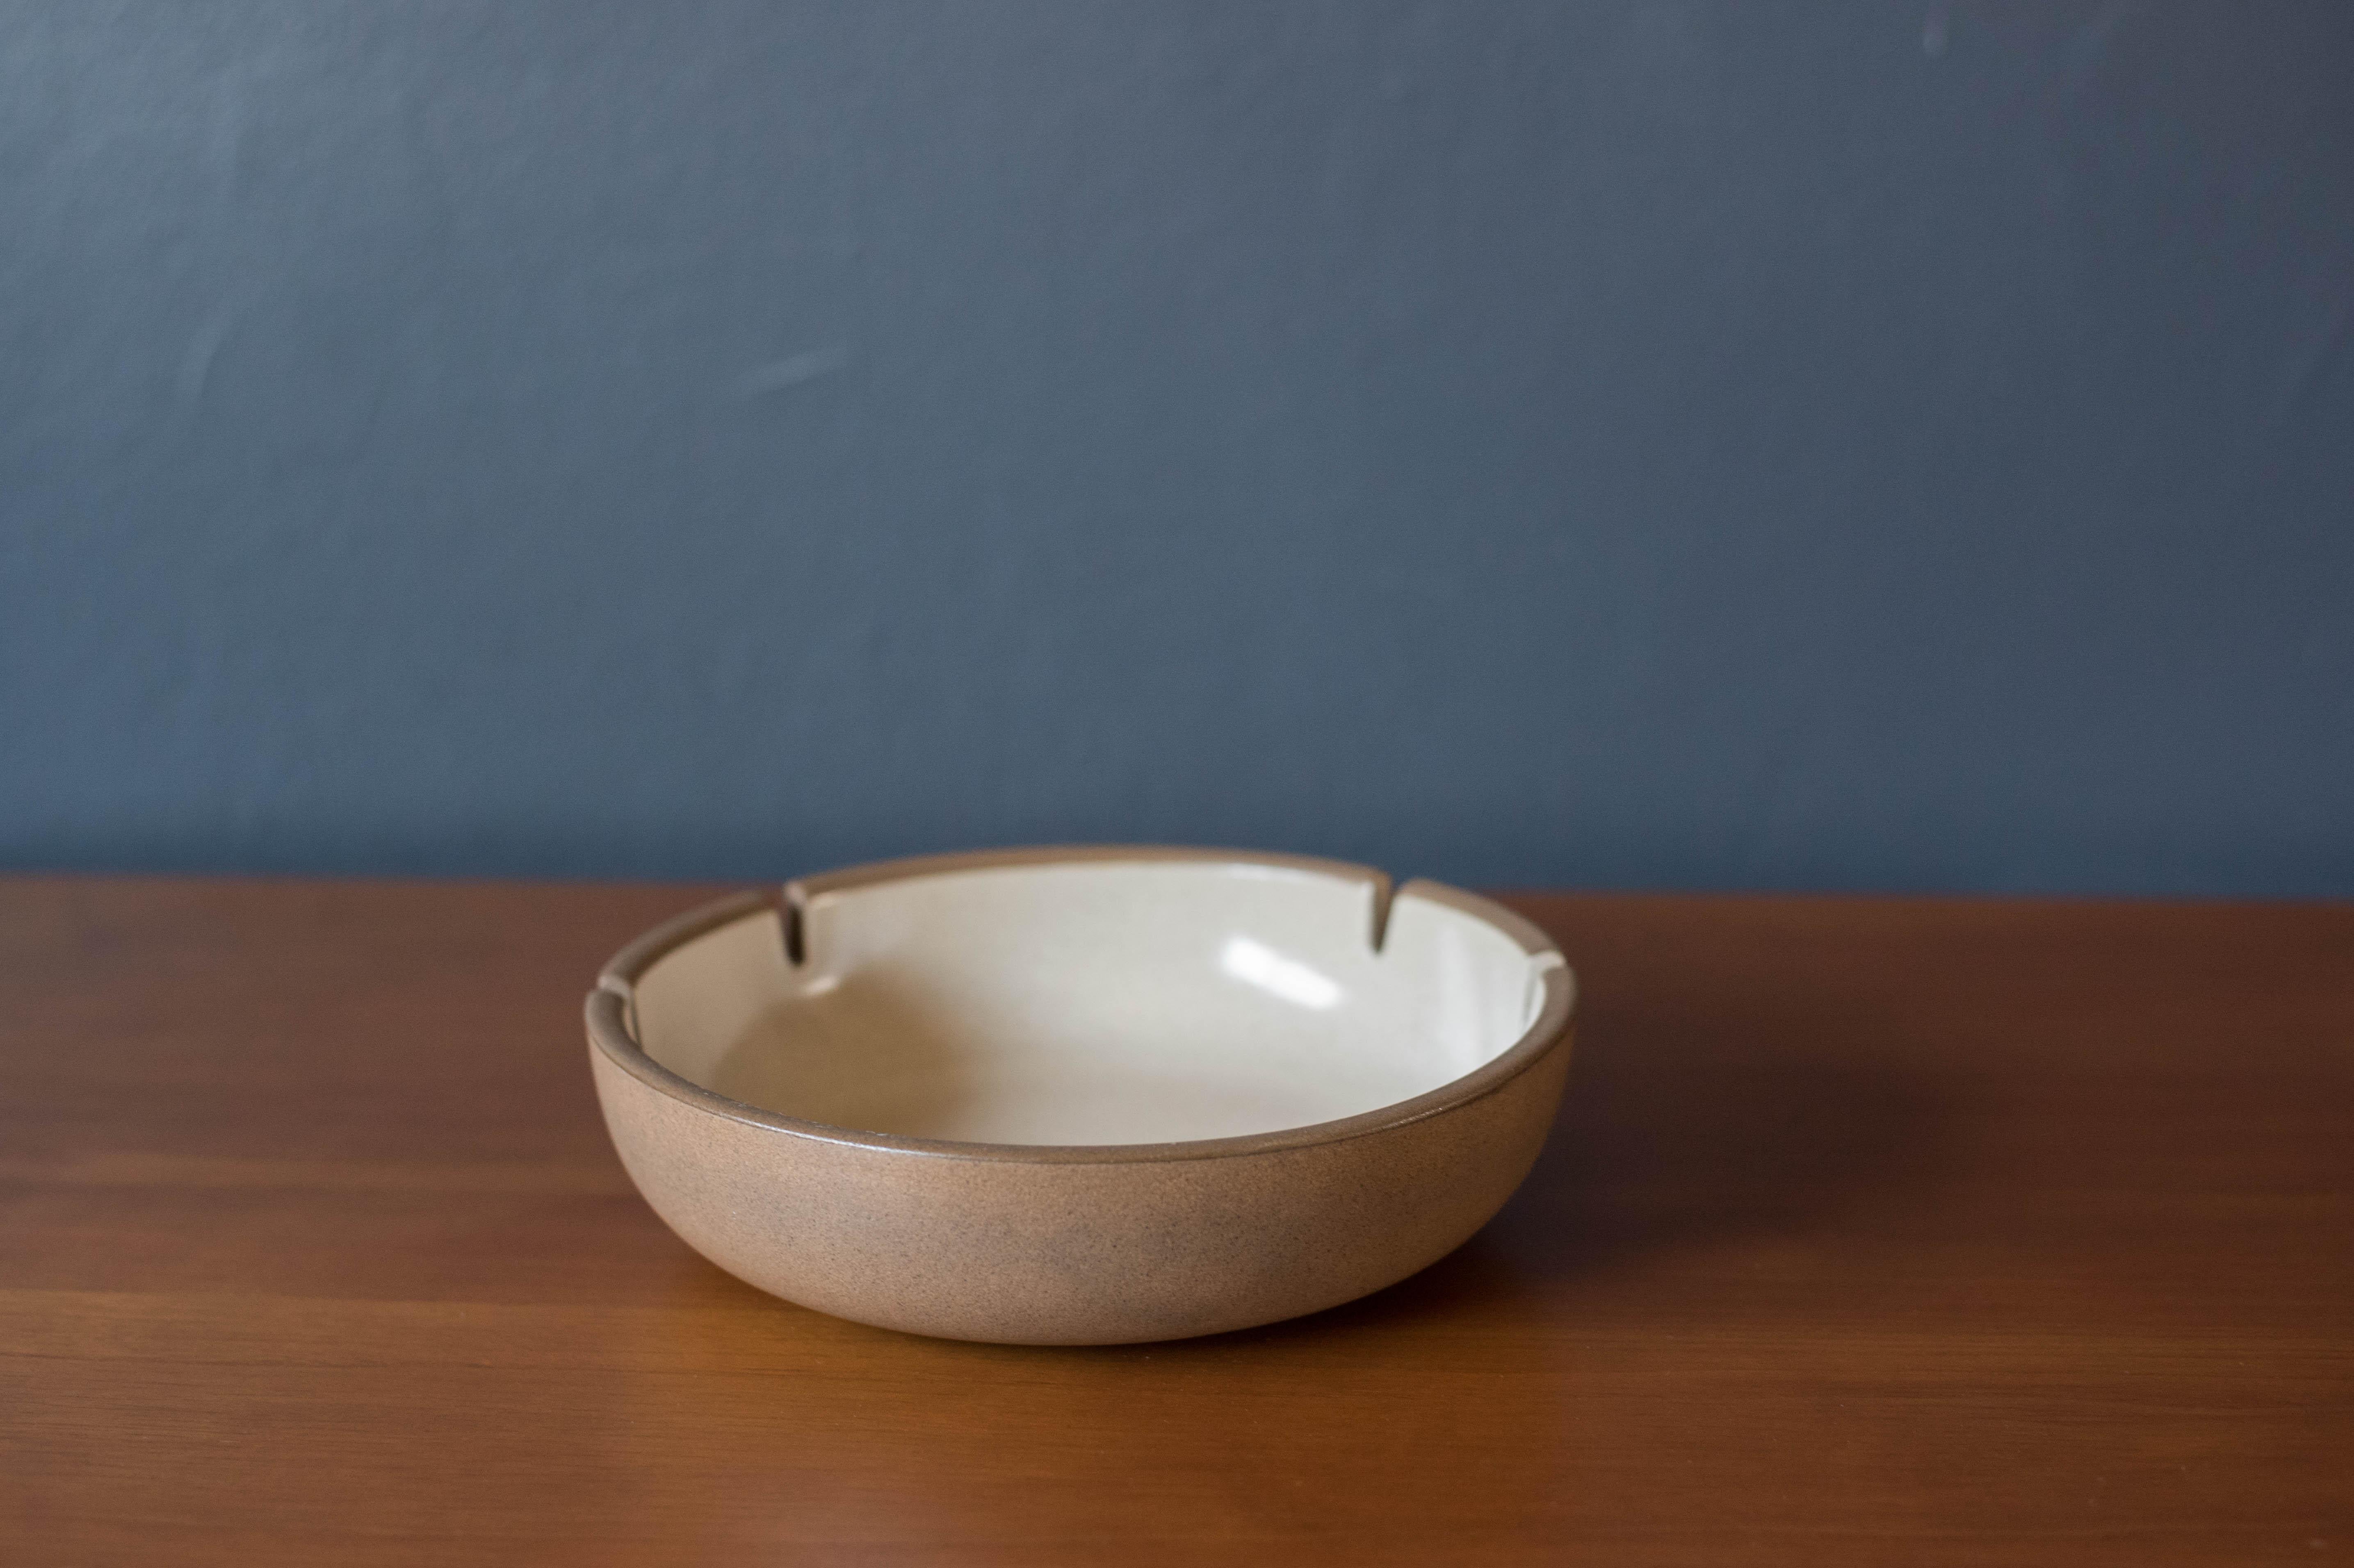 Vintage stoneware studio pottery ashtray designed by Edith and Brian Heath for Heath Ceramics of Sausalito, California. Features a two-tone contrasting 'sandalwood' glaze that displays a natural matte taupe and ivory speckled gloss finish. 